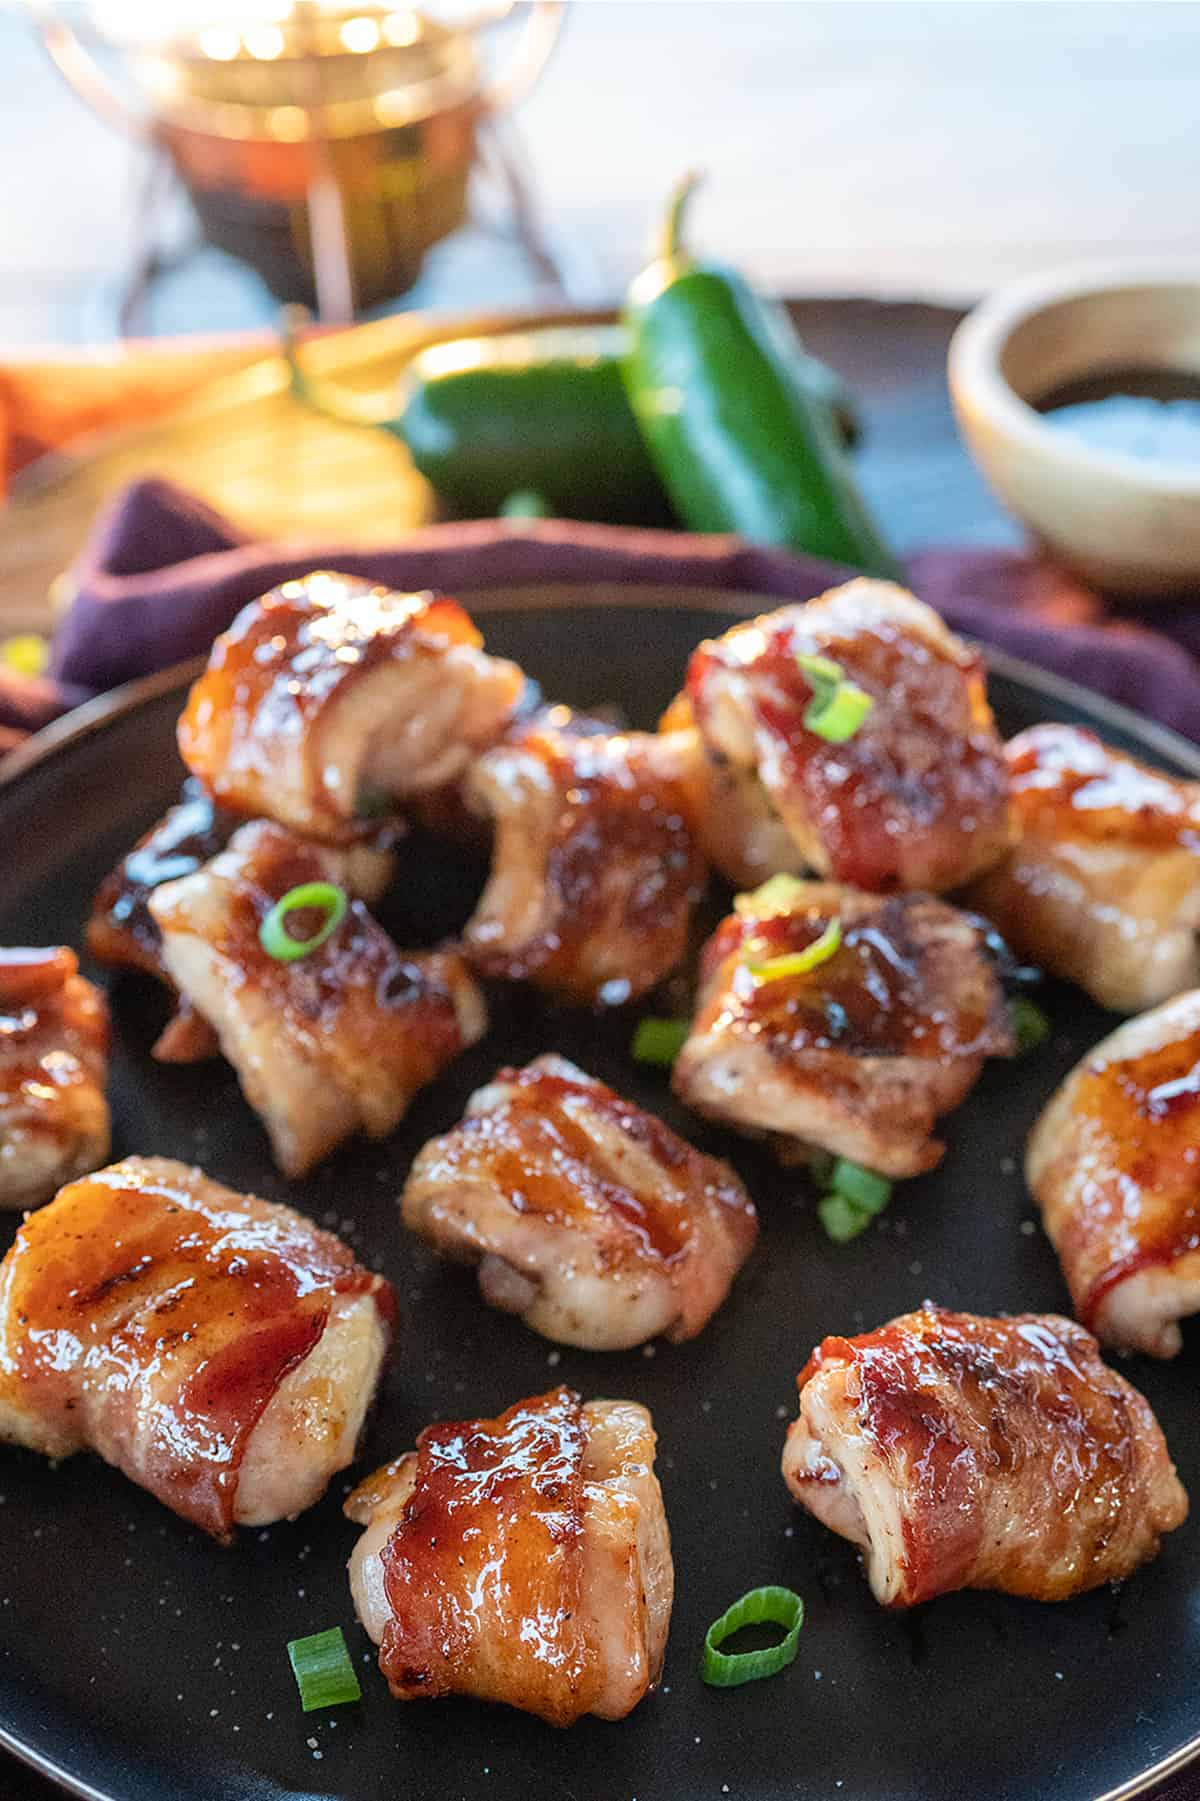 plate of bacon wrapped chicken thighs.